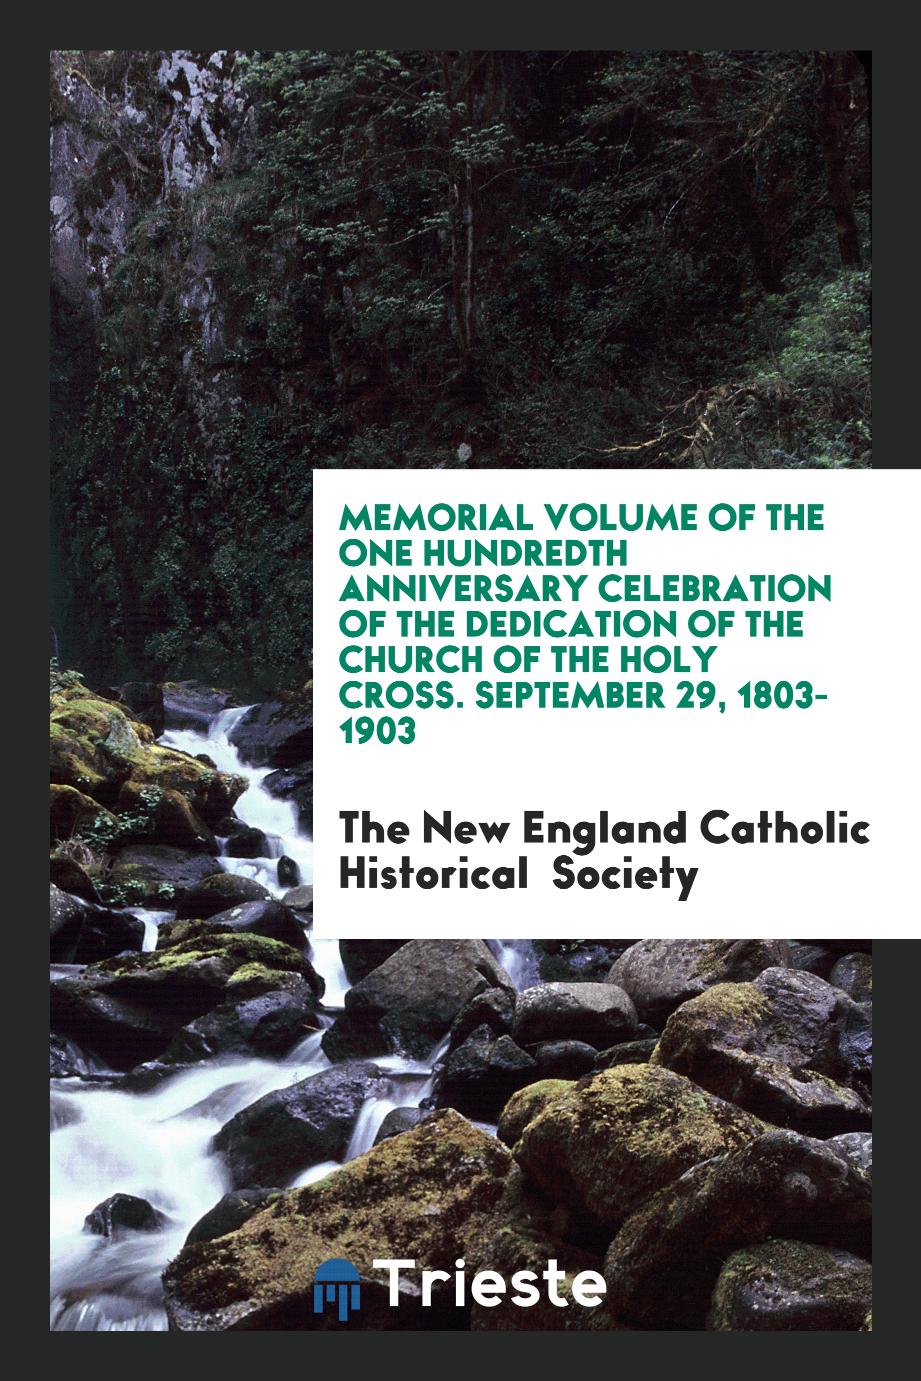 Memorial Volume of the One Hundredth Anniversary Celebration of the Dedication of the Church of the Holy Cross. September 29, 1803-1903